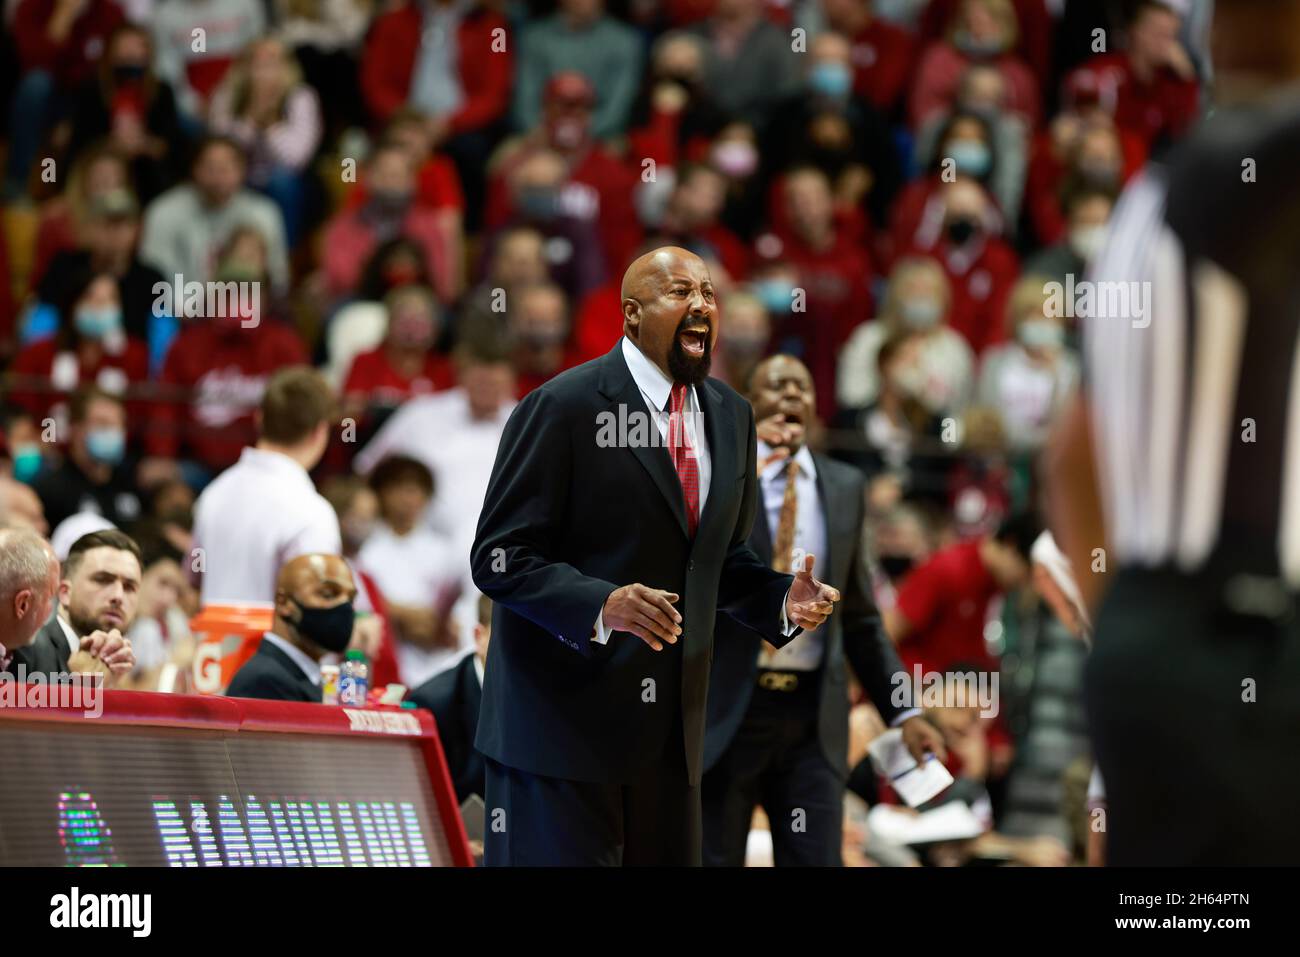 Bloomington, USA. 12th Nov, 2021. Indiana University coach Mike Woodson seen in action at a game against Northern Illinois University during an NCAA basketball game at Assembly Hall in Bloomington, Ind. The Indiana Hoosiers beat NIU 85-49. Credit: SOPA Images Limited/Alamy Live News Stock Photo